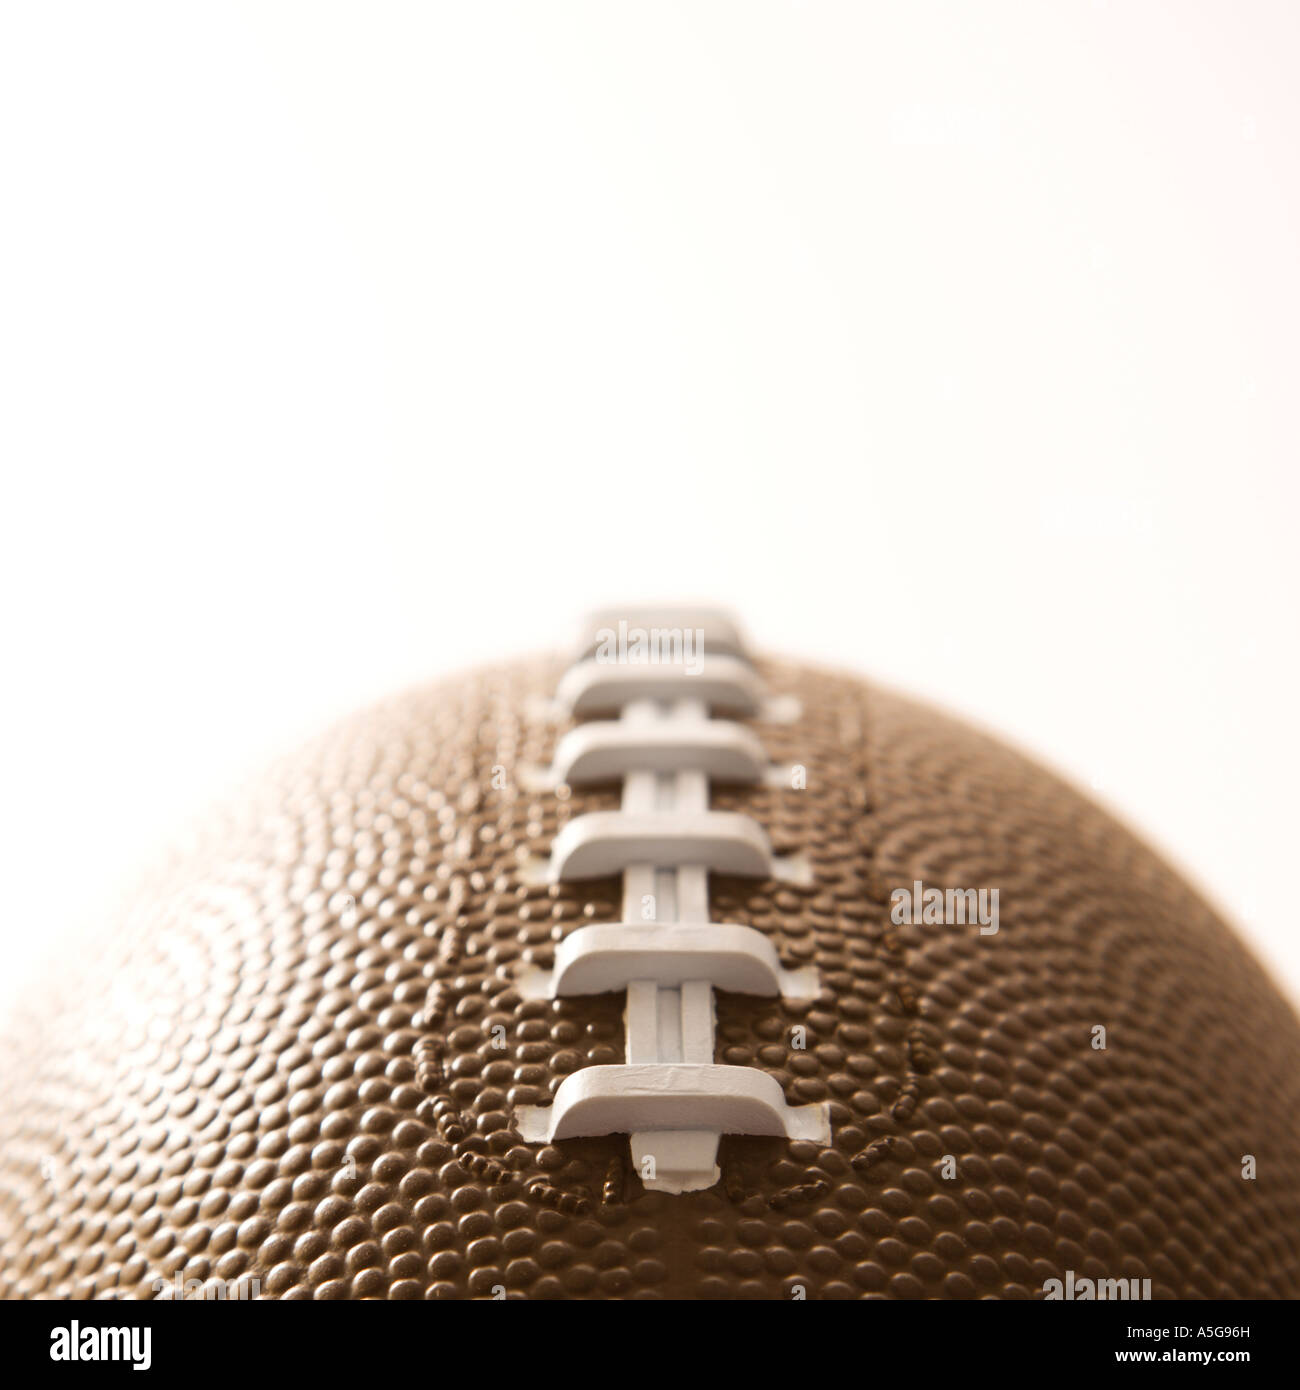 Close up of American football on white background Stock Photo